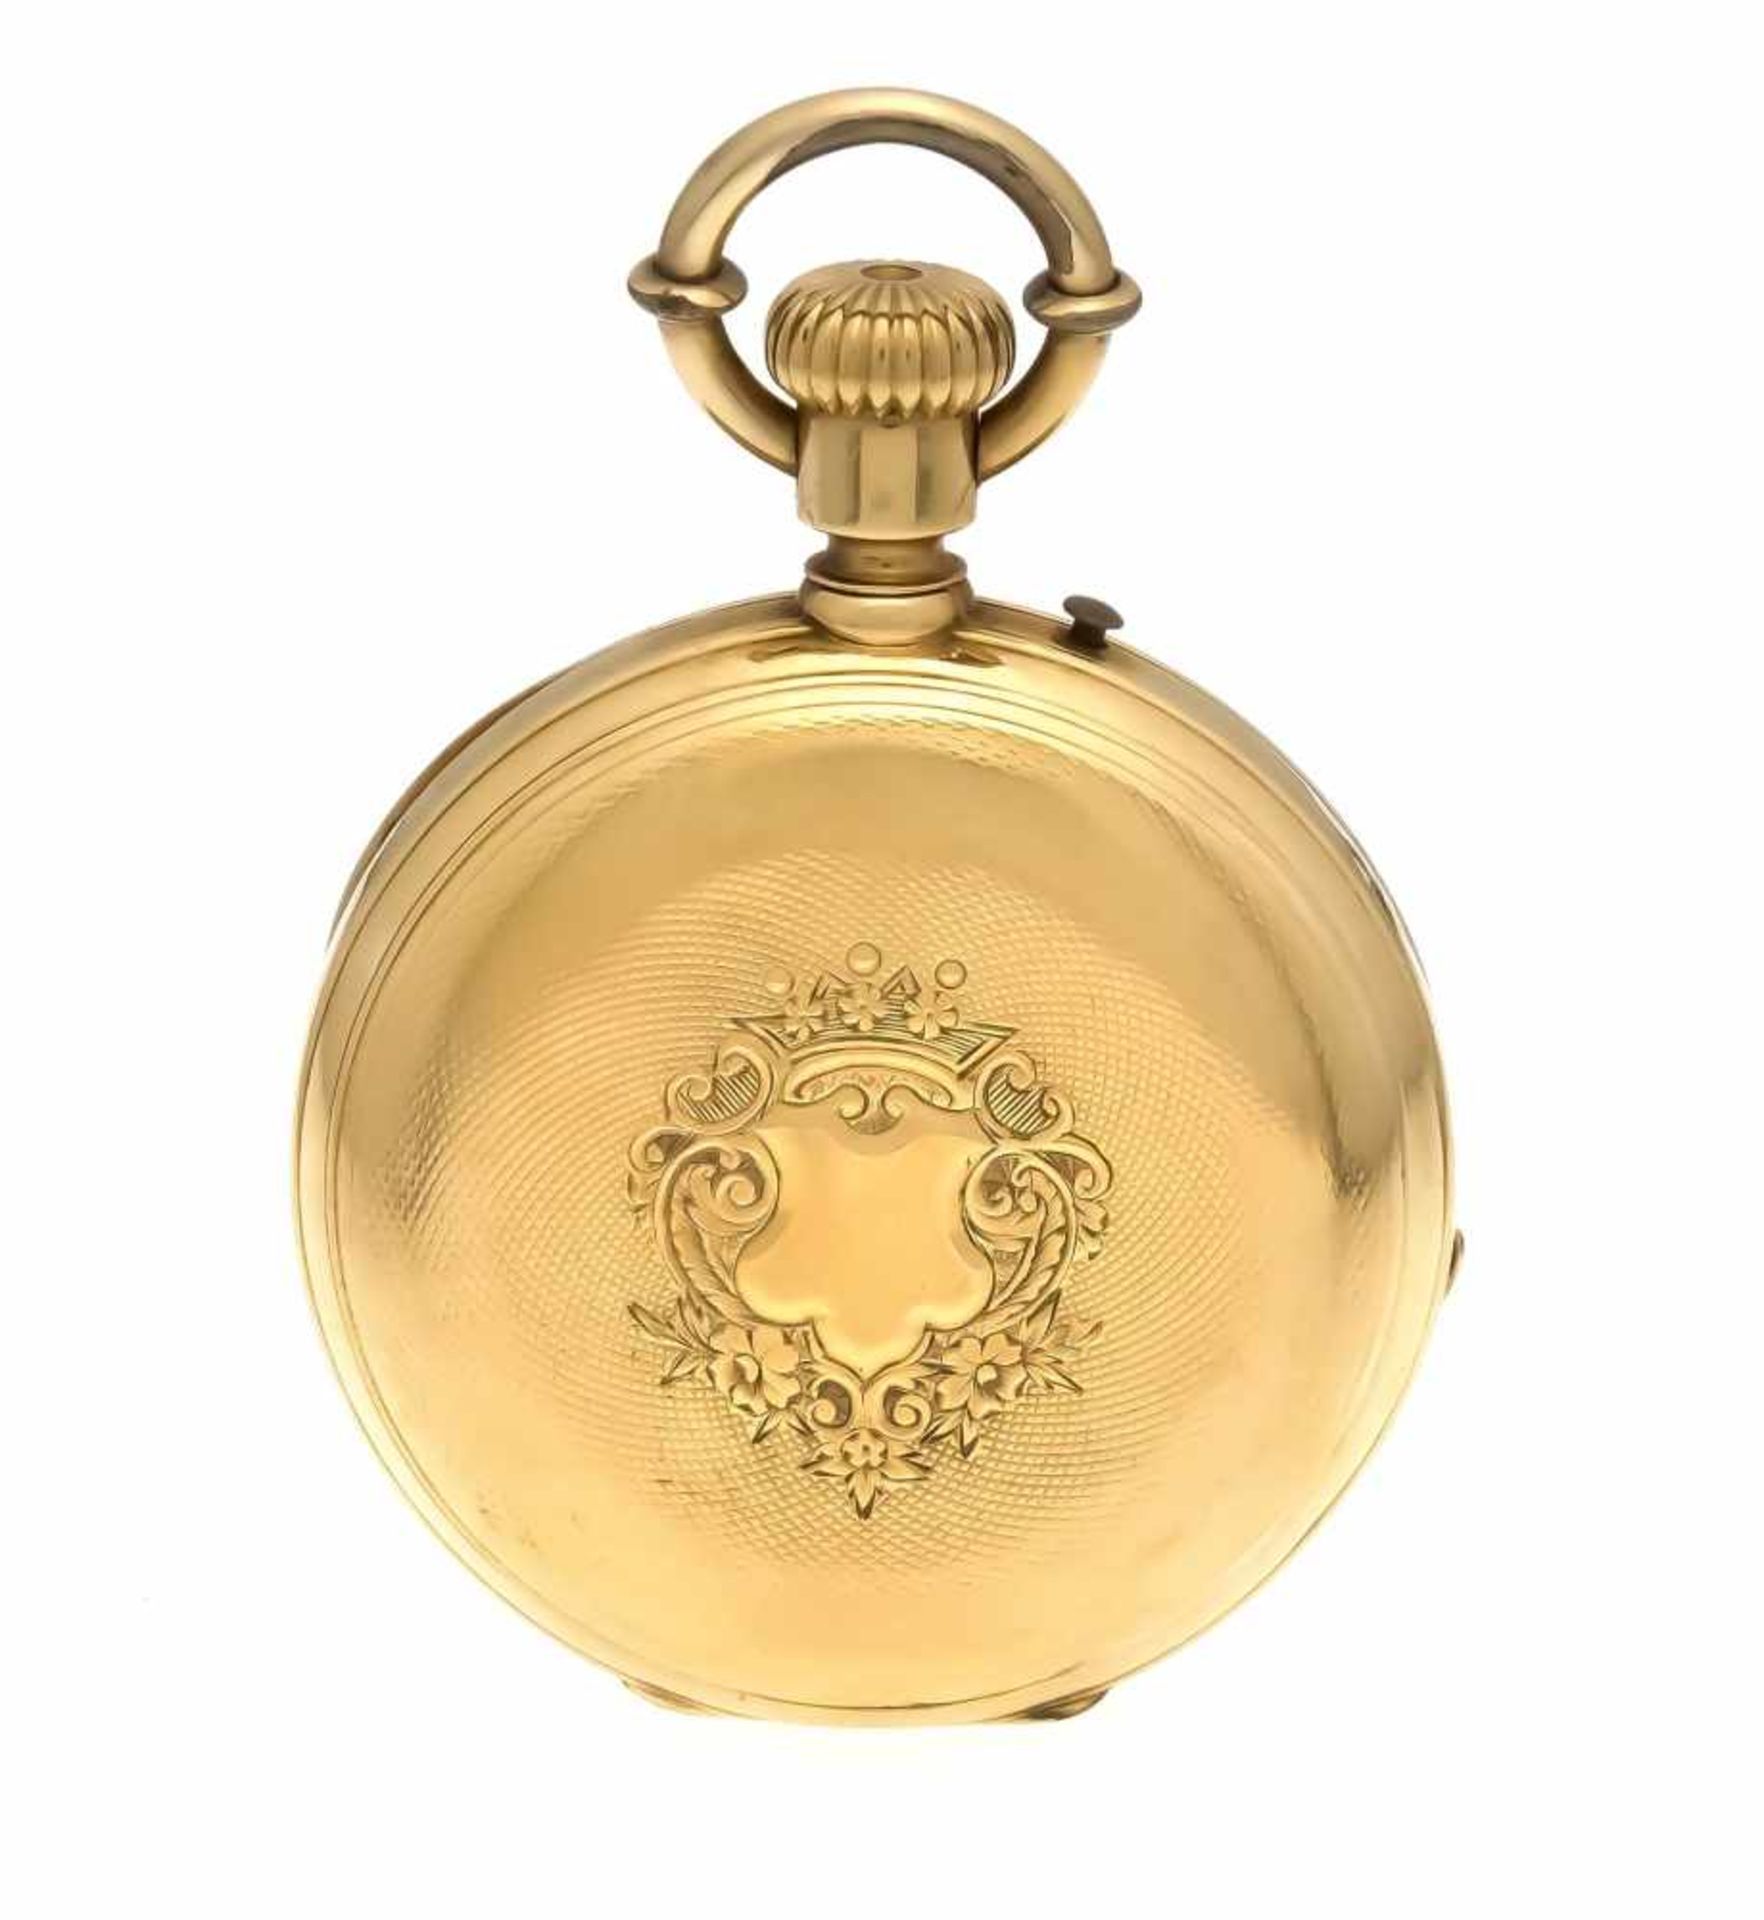 Men's pocket watch spring cover yellow gold / 750, 3 covers gold, anchor movement is - Bild 3 aus 3